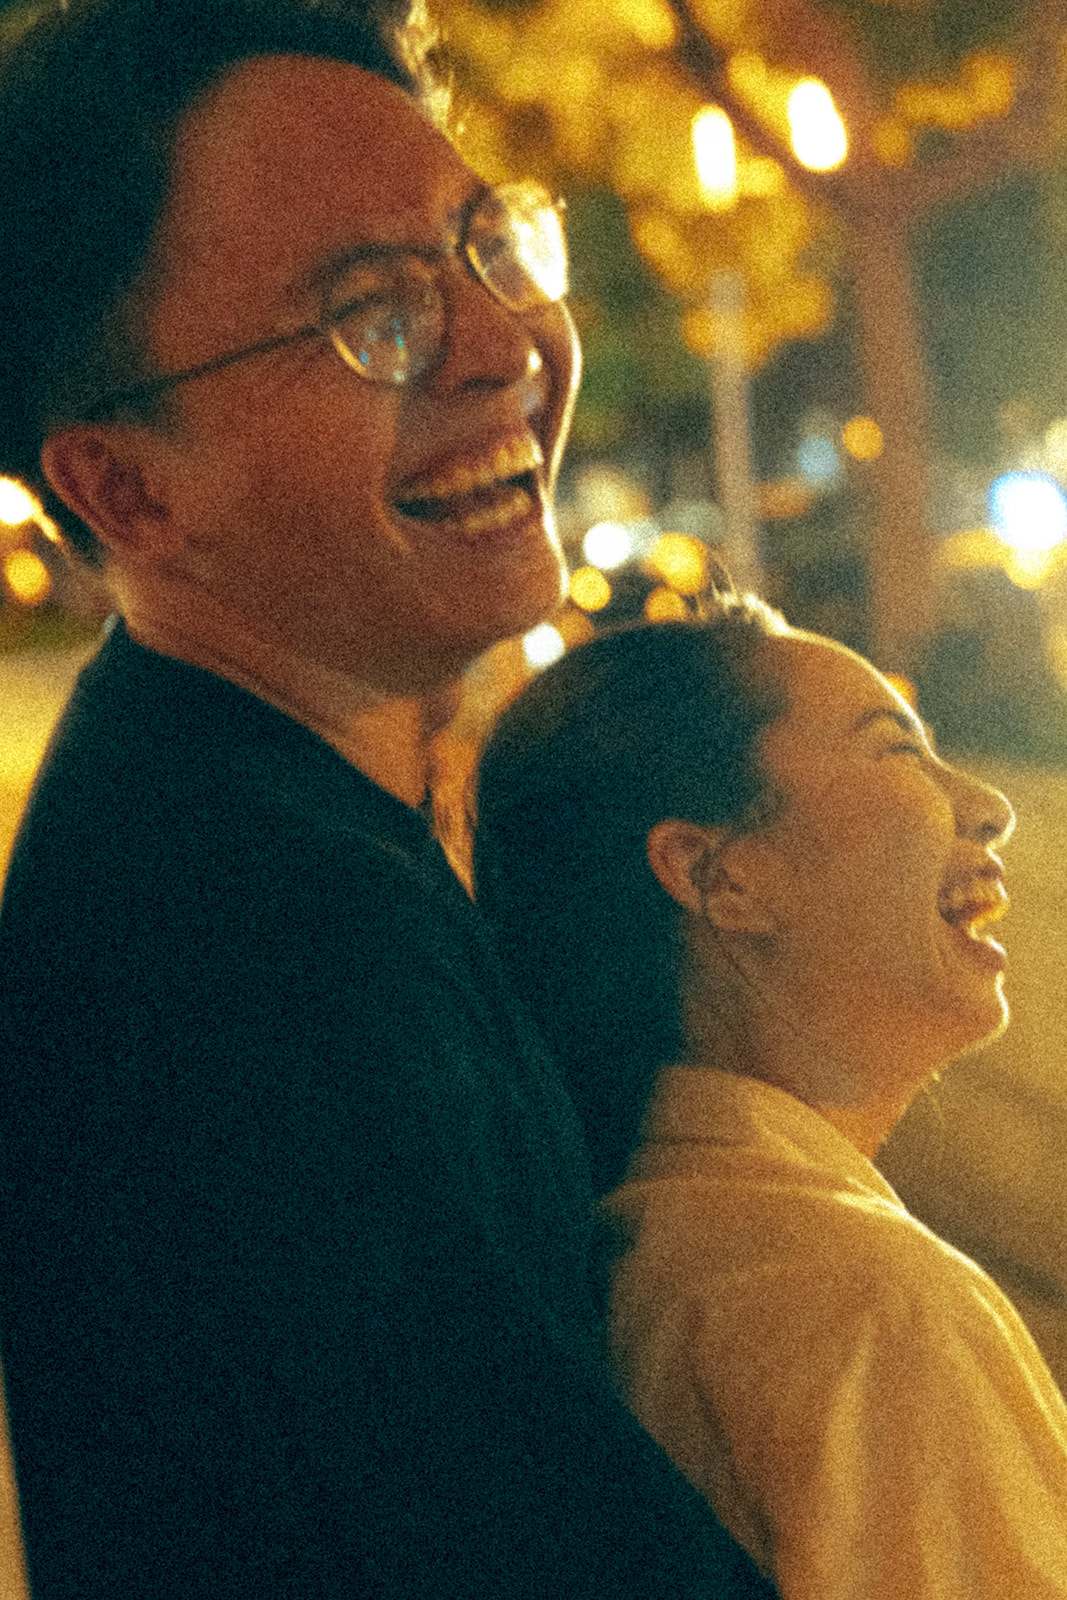 Casual authentic happy night time Pre-wedding photography in Saigon